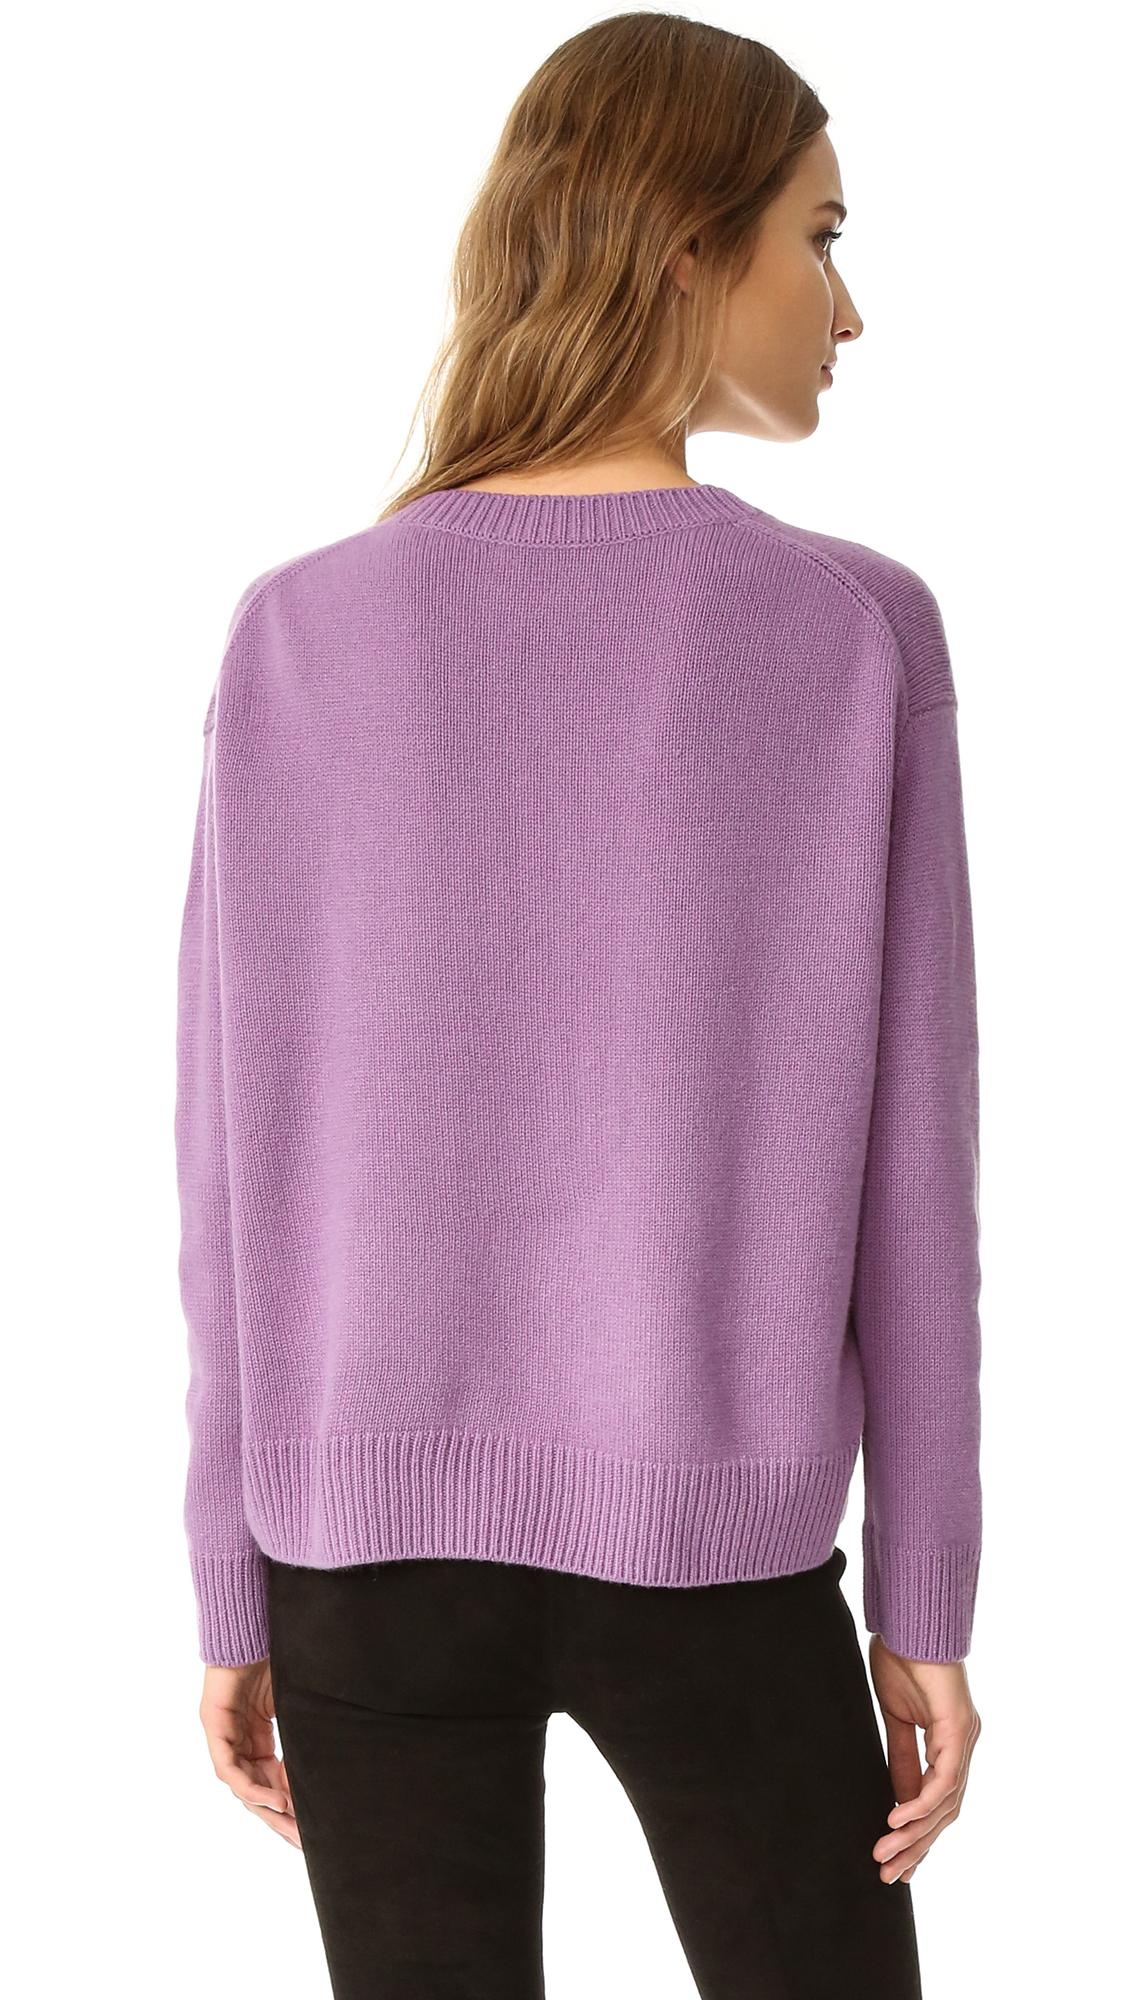 Vince Boxy Cashmere Sweater in Violet (Purple) - Lyst